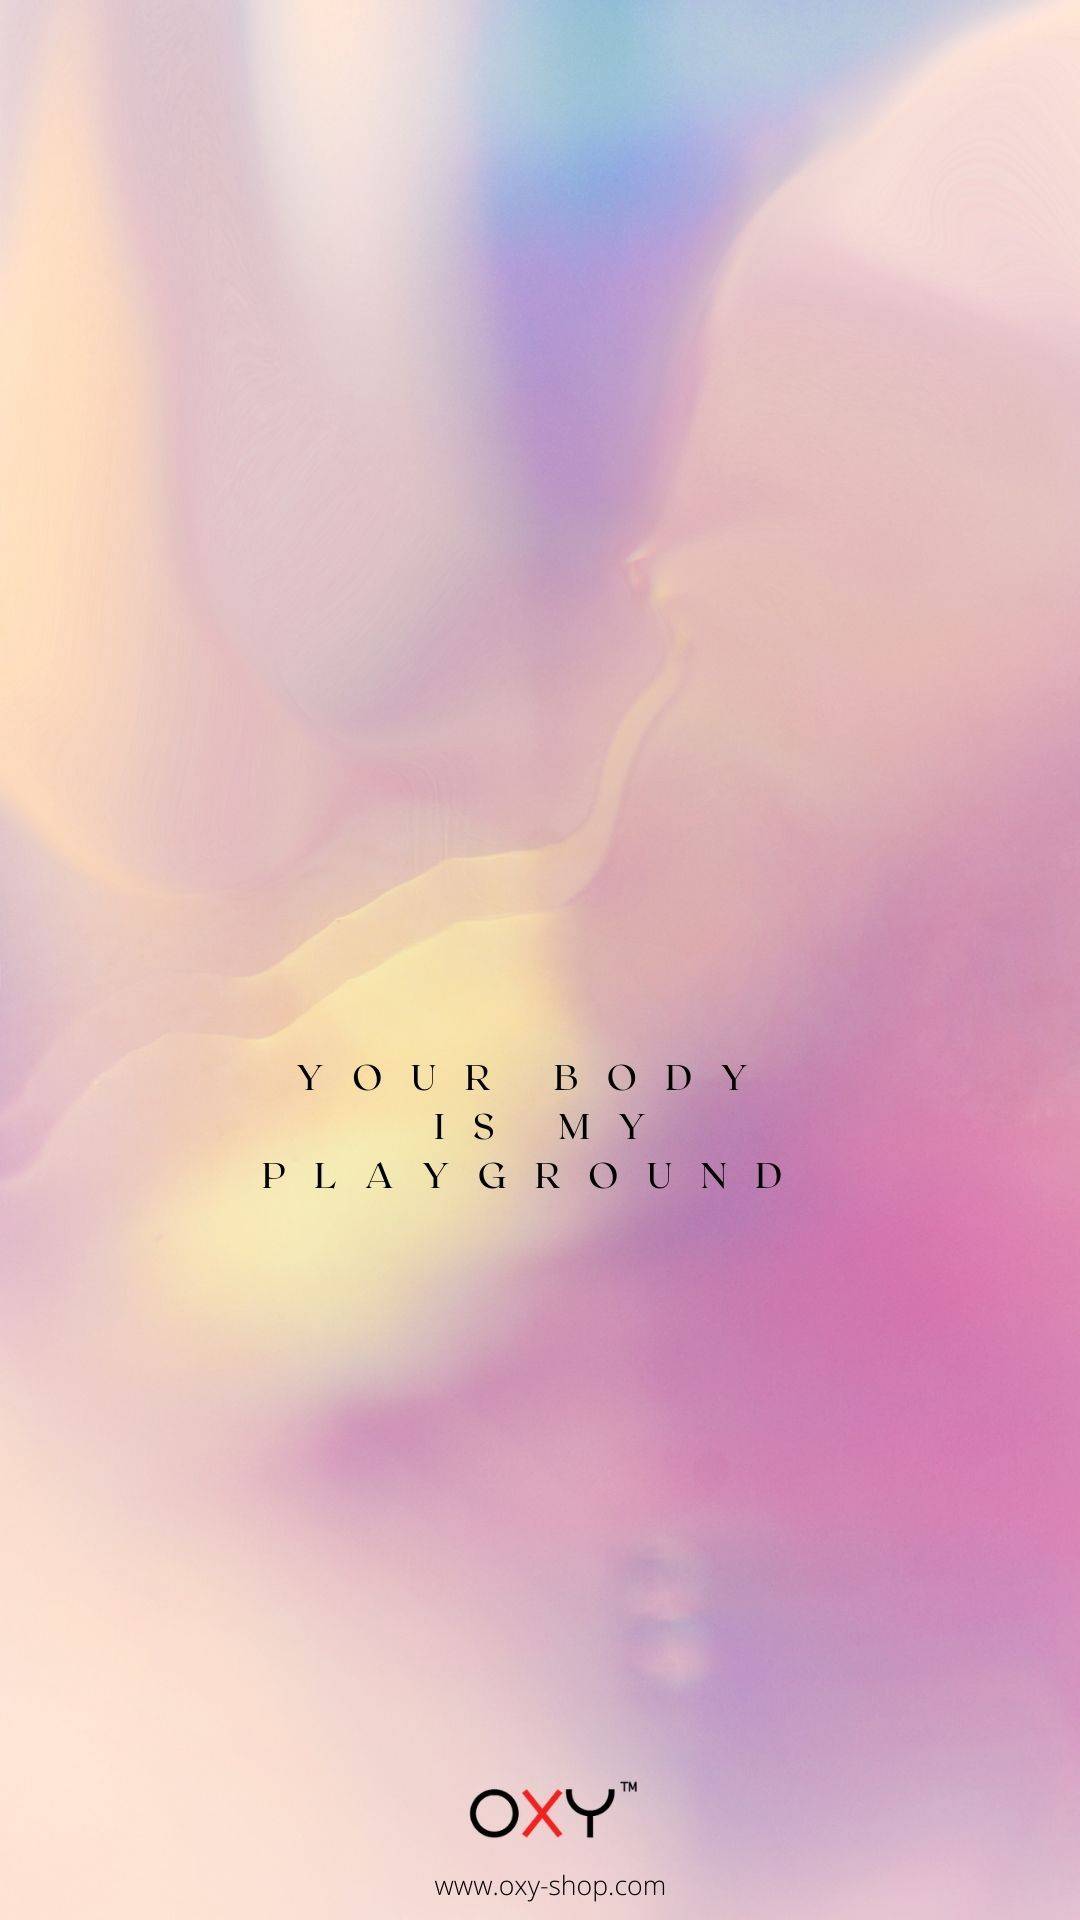 Your body is my playground. - BDSM wallpaper